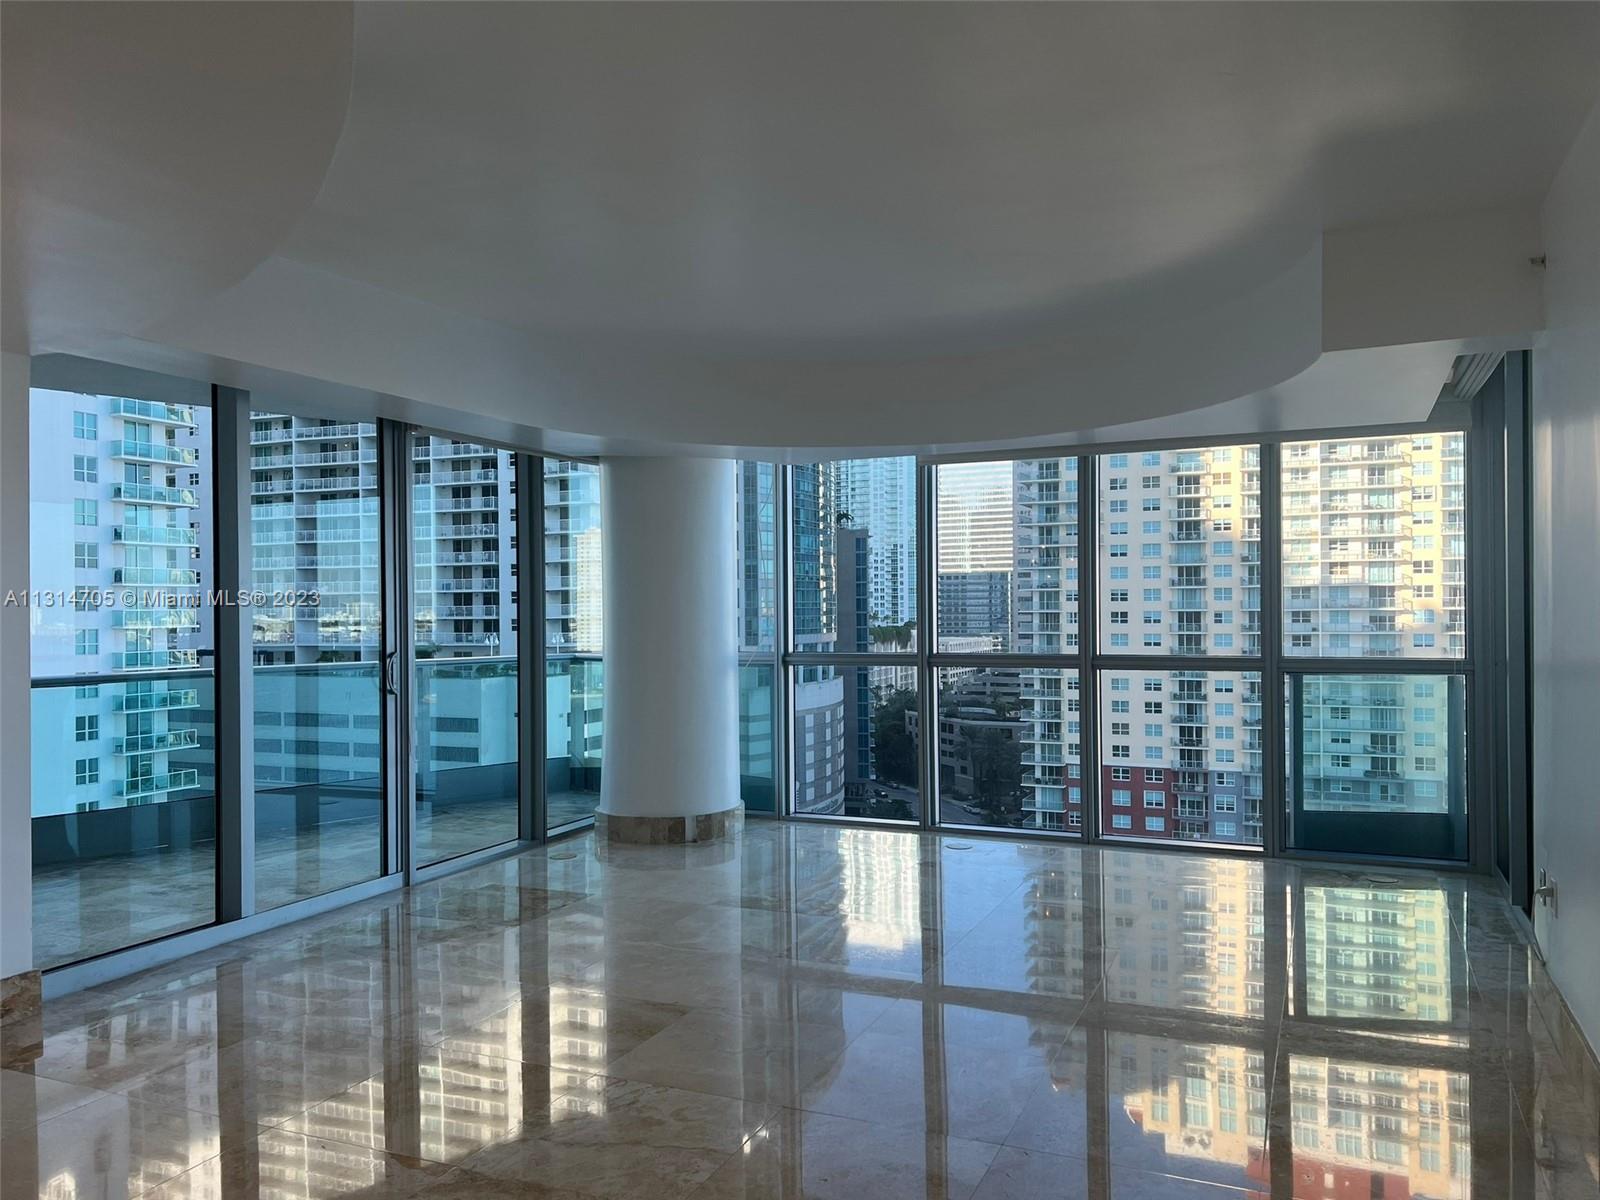 BEAUTIFUL OPEN AND BRIGHT CORNER UNIT IN PRESTIGIOUS, ELEGANT AND EXCLUSIVE JADE BRICKELL, WITH BAY AND CITY VIEWS, WATER VIEWS FROM LIVING ROOM + GUEST ROOM. ELEVATOR OPENS DIRECTLY INTO CONDO WITH FINGERPRINT SECURITY ACCESS! THIS UNIT FEATURES BEAUTIFUL MARBLE FLOORS THROUGHOUT FLOOR WITH TERRACE, EUROPEAN STYLE KITCHEN WITH GRANITE COUNTER TOPS, SS APPLIANCES, WINE COOLER, MIELE COFFEEMAKER, FLOOR TO CEILING HURRICANE IMPACT AND SOUND REDUCING WINDOWS AND MORE! THE AMENITIES INCLUDED CONCIERGE SERVICES, BUSINESS CENTER, 24 HOURS SECURITY, VALET SERVICES, INFINITY POOL, FITNESS CENTER, RACQUET BALL COURTS AND MUCH MORE. ONE PRAKIG ASSIGNED AMD ONE VALET + GUEST VALE. NOW WE ARE SHOWING THE UNIT. DO NOT MISS THIS OPPORTUNITY.